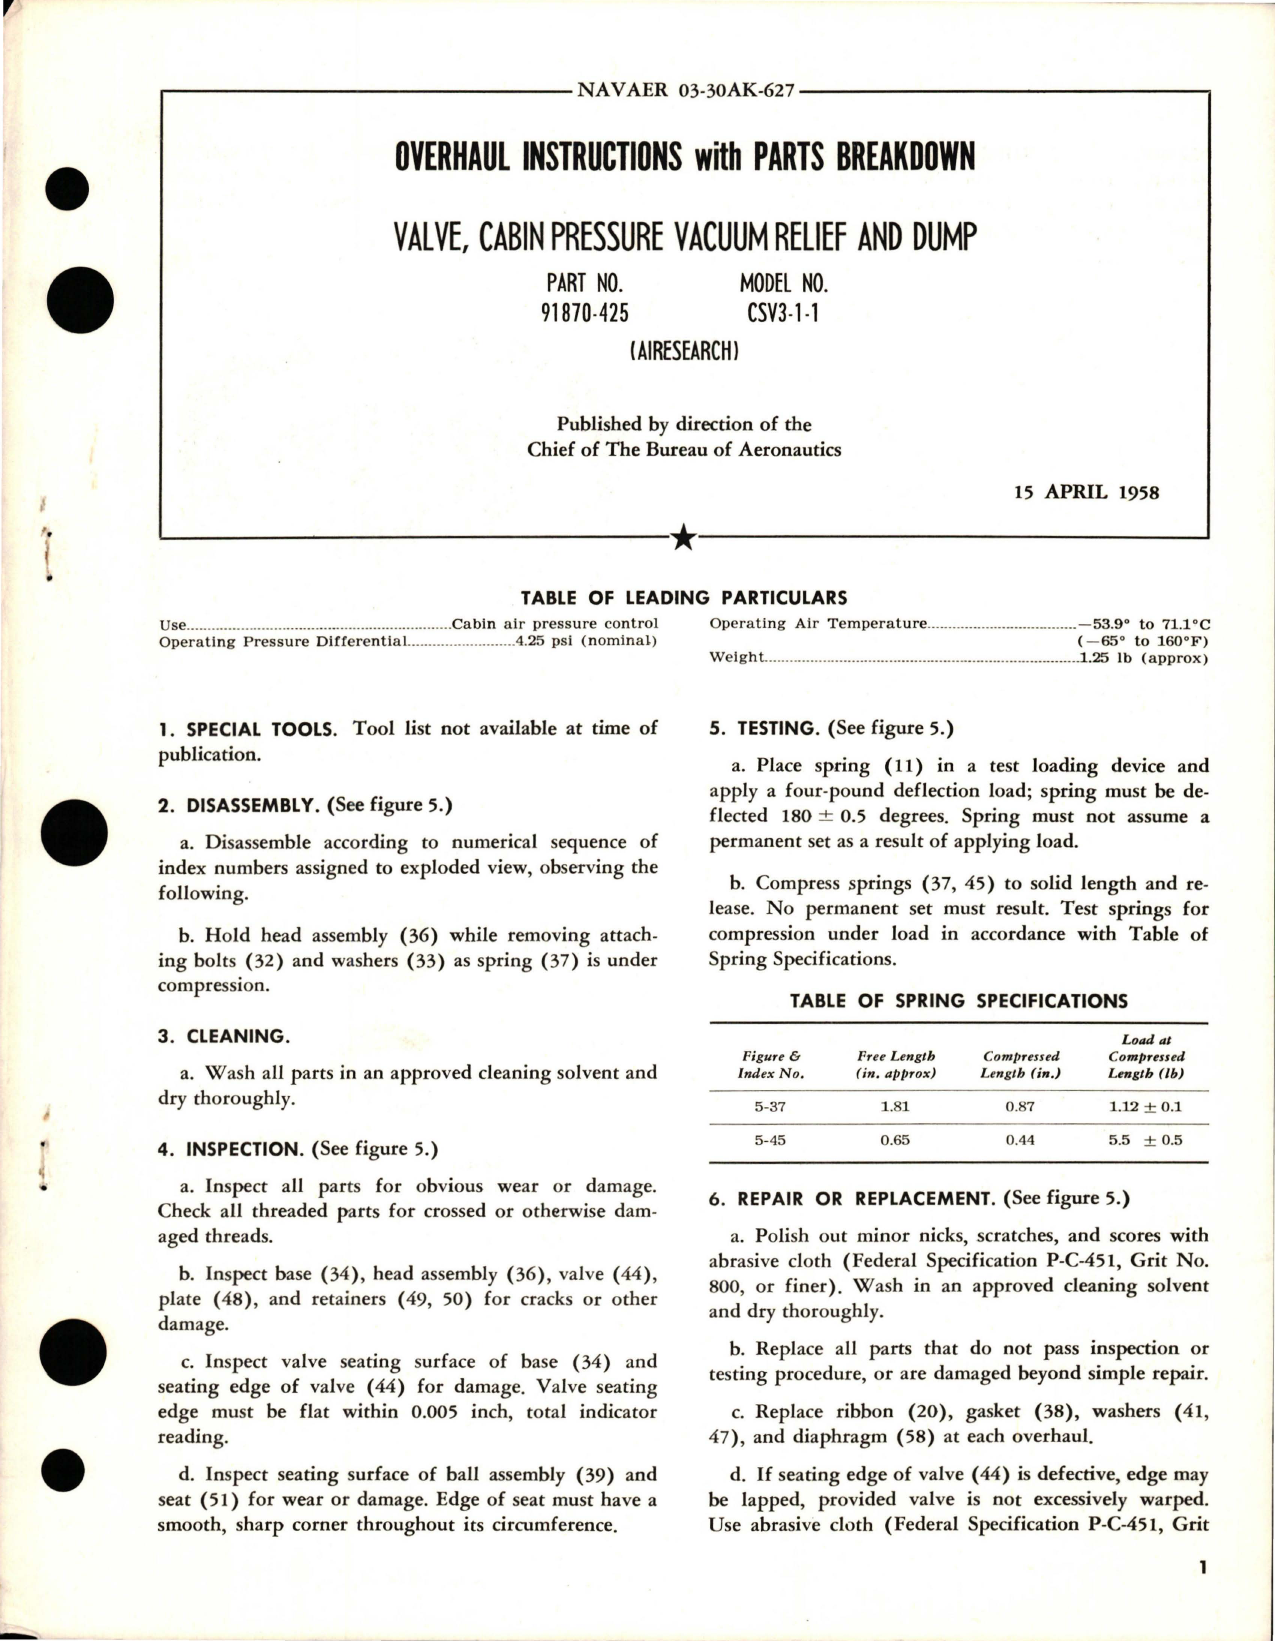 Sample page 1 from AirCorps Library document: Overhaul Instructions with Parts Breakdown for Cabin Pressure Vacuum Relief and Dump Valve - Part 91870-425 - Model CSV3-1-1